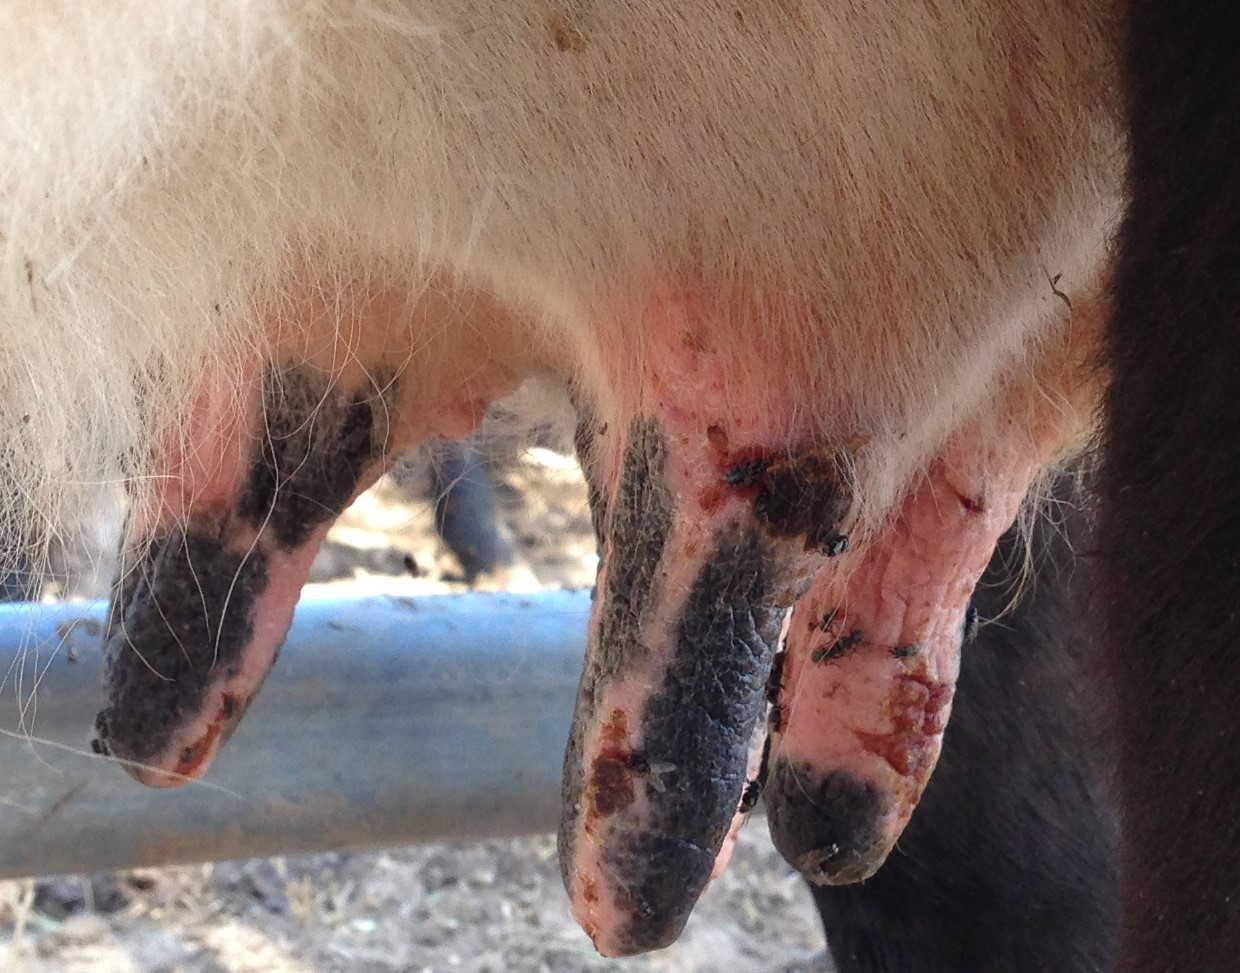 Cattle udders affected by photosensitisation. Udders appear red and swollen with scabs. 